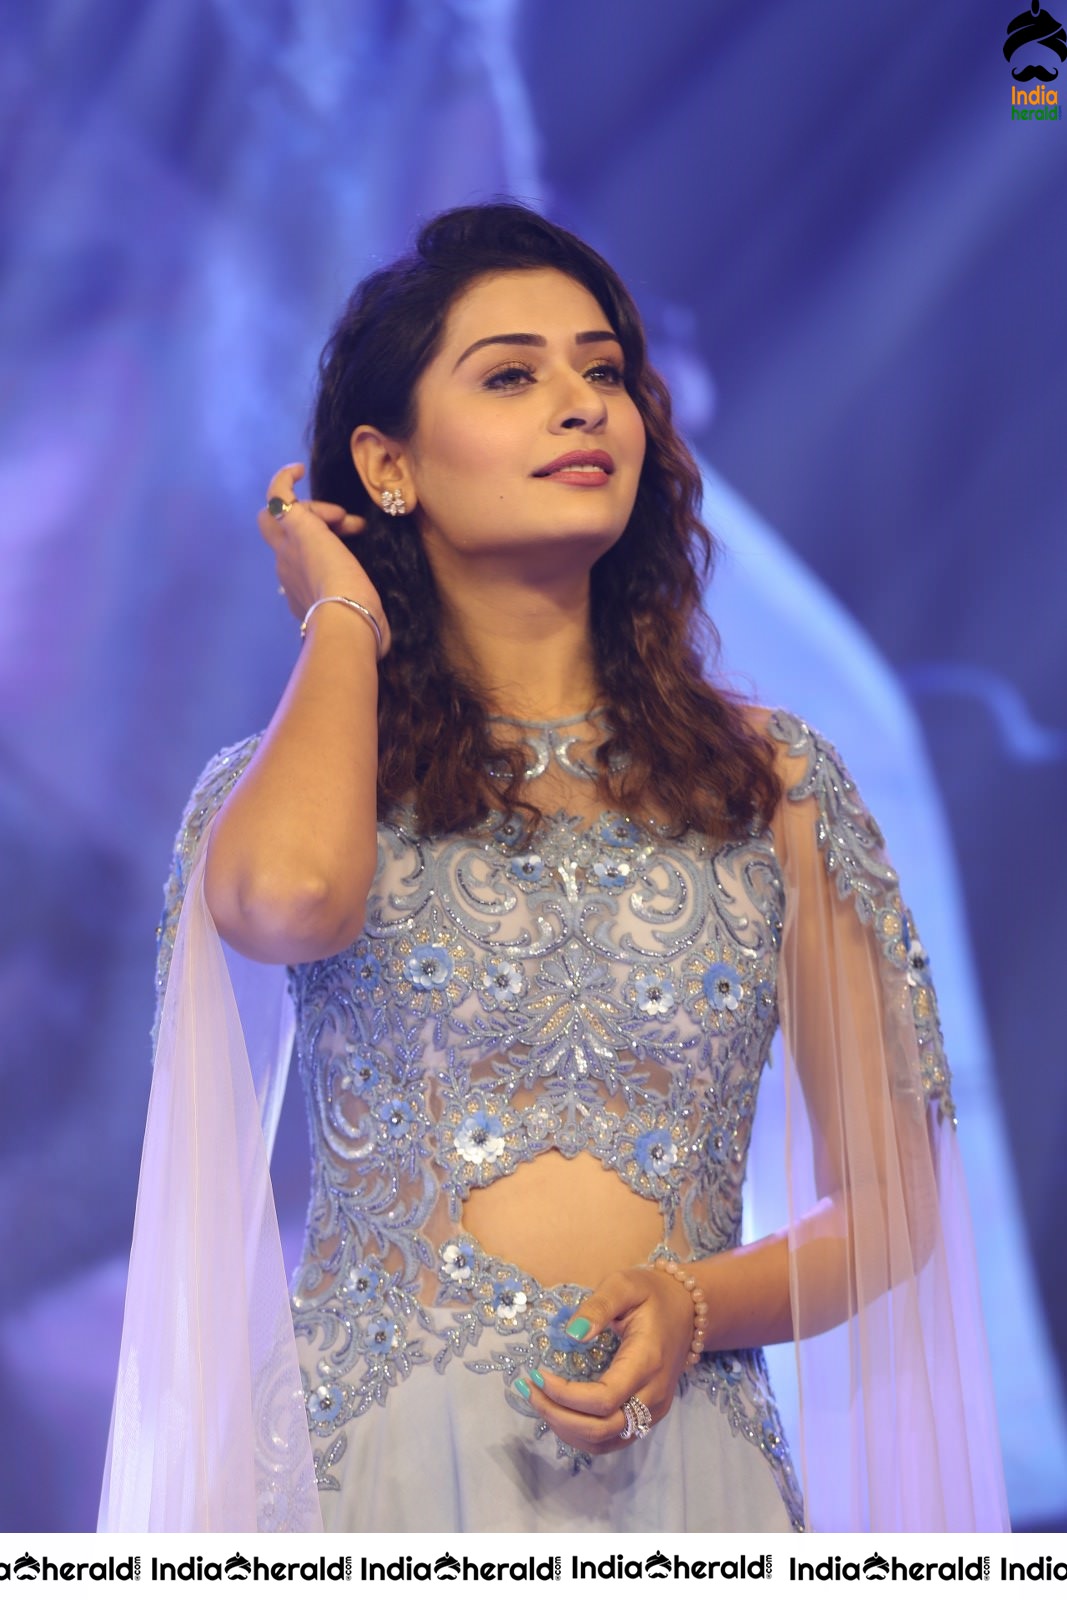 Payal Rajput Looking Like a Butterfly in this Attire Set 2